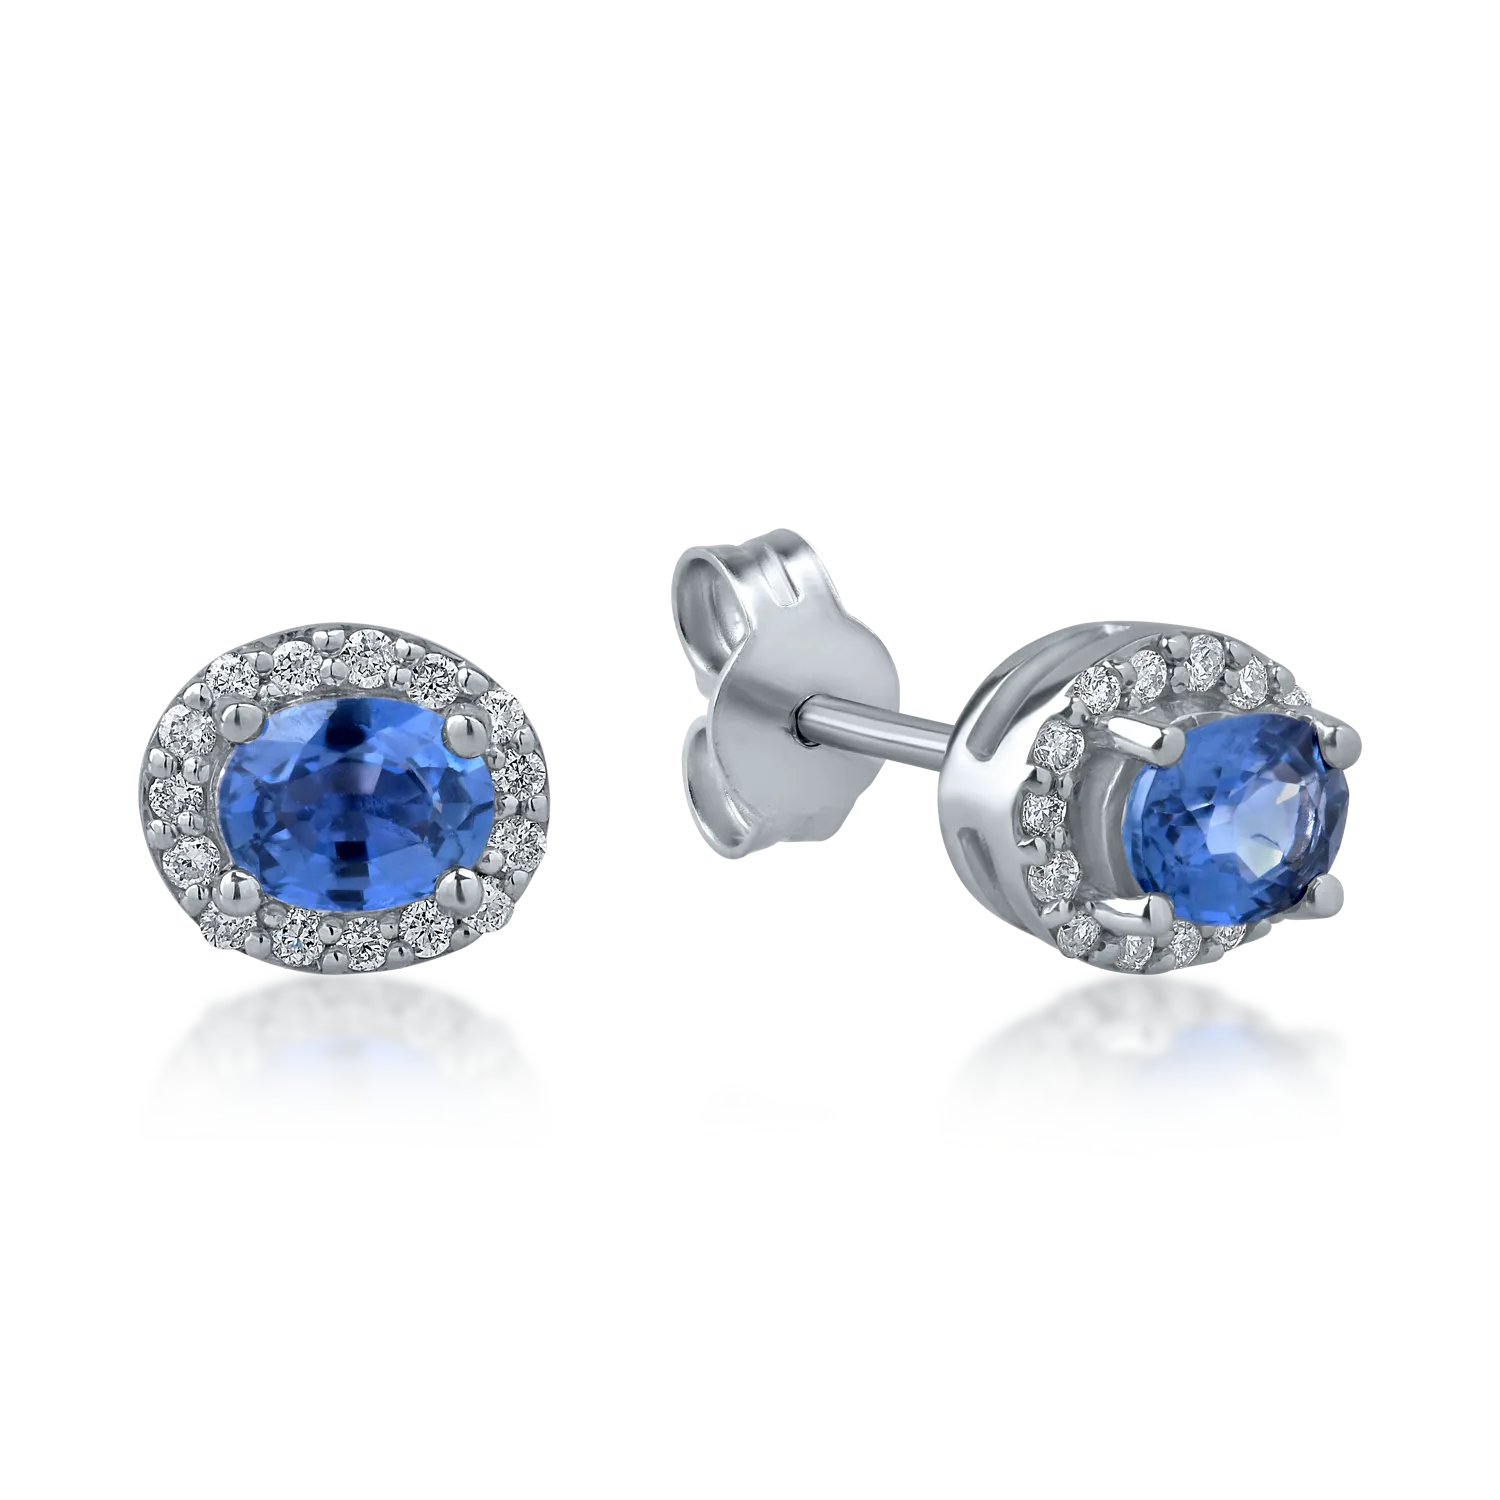 White gold oval earrings with 0.74ct sapphires and 0.16ct diamonds